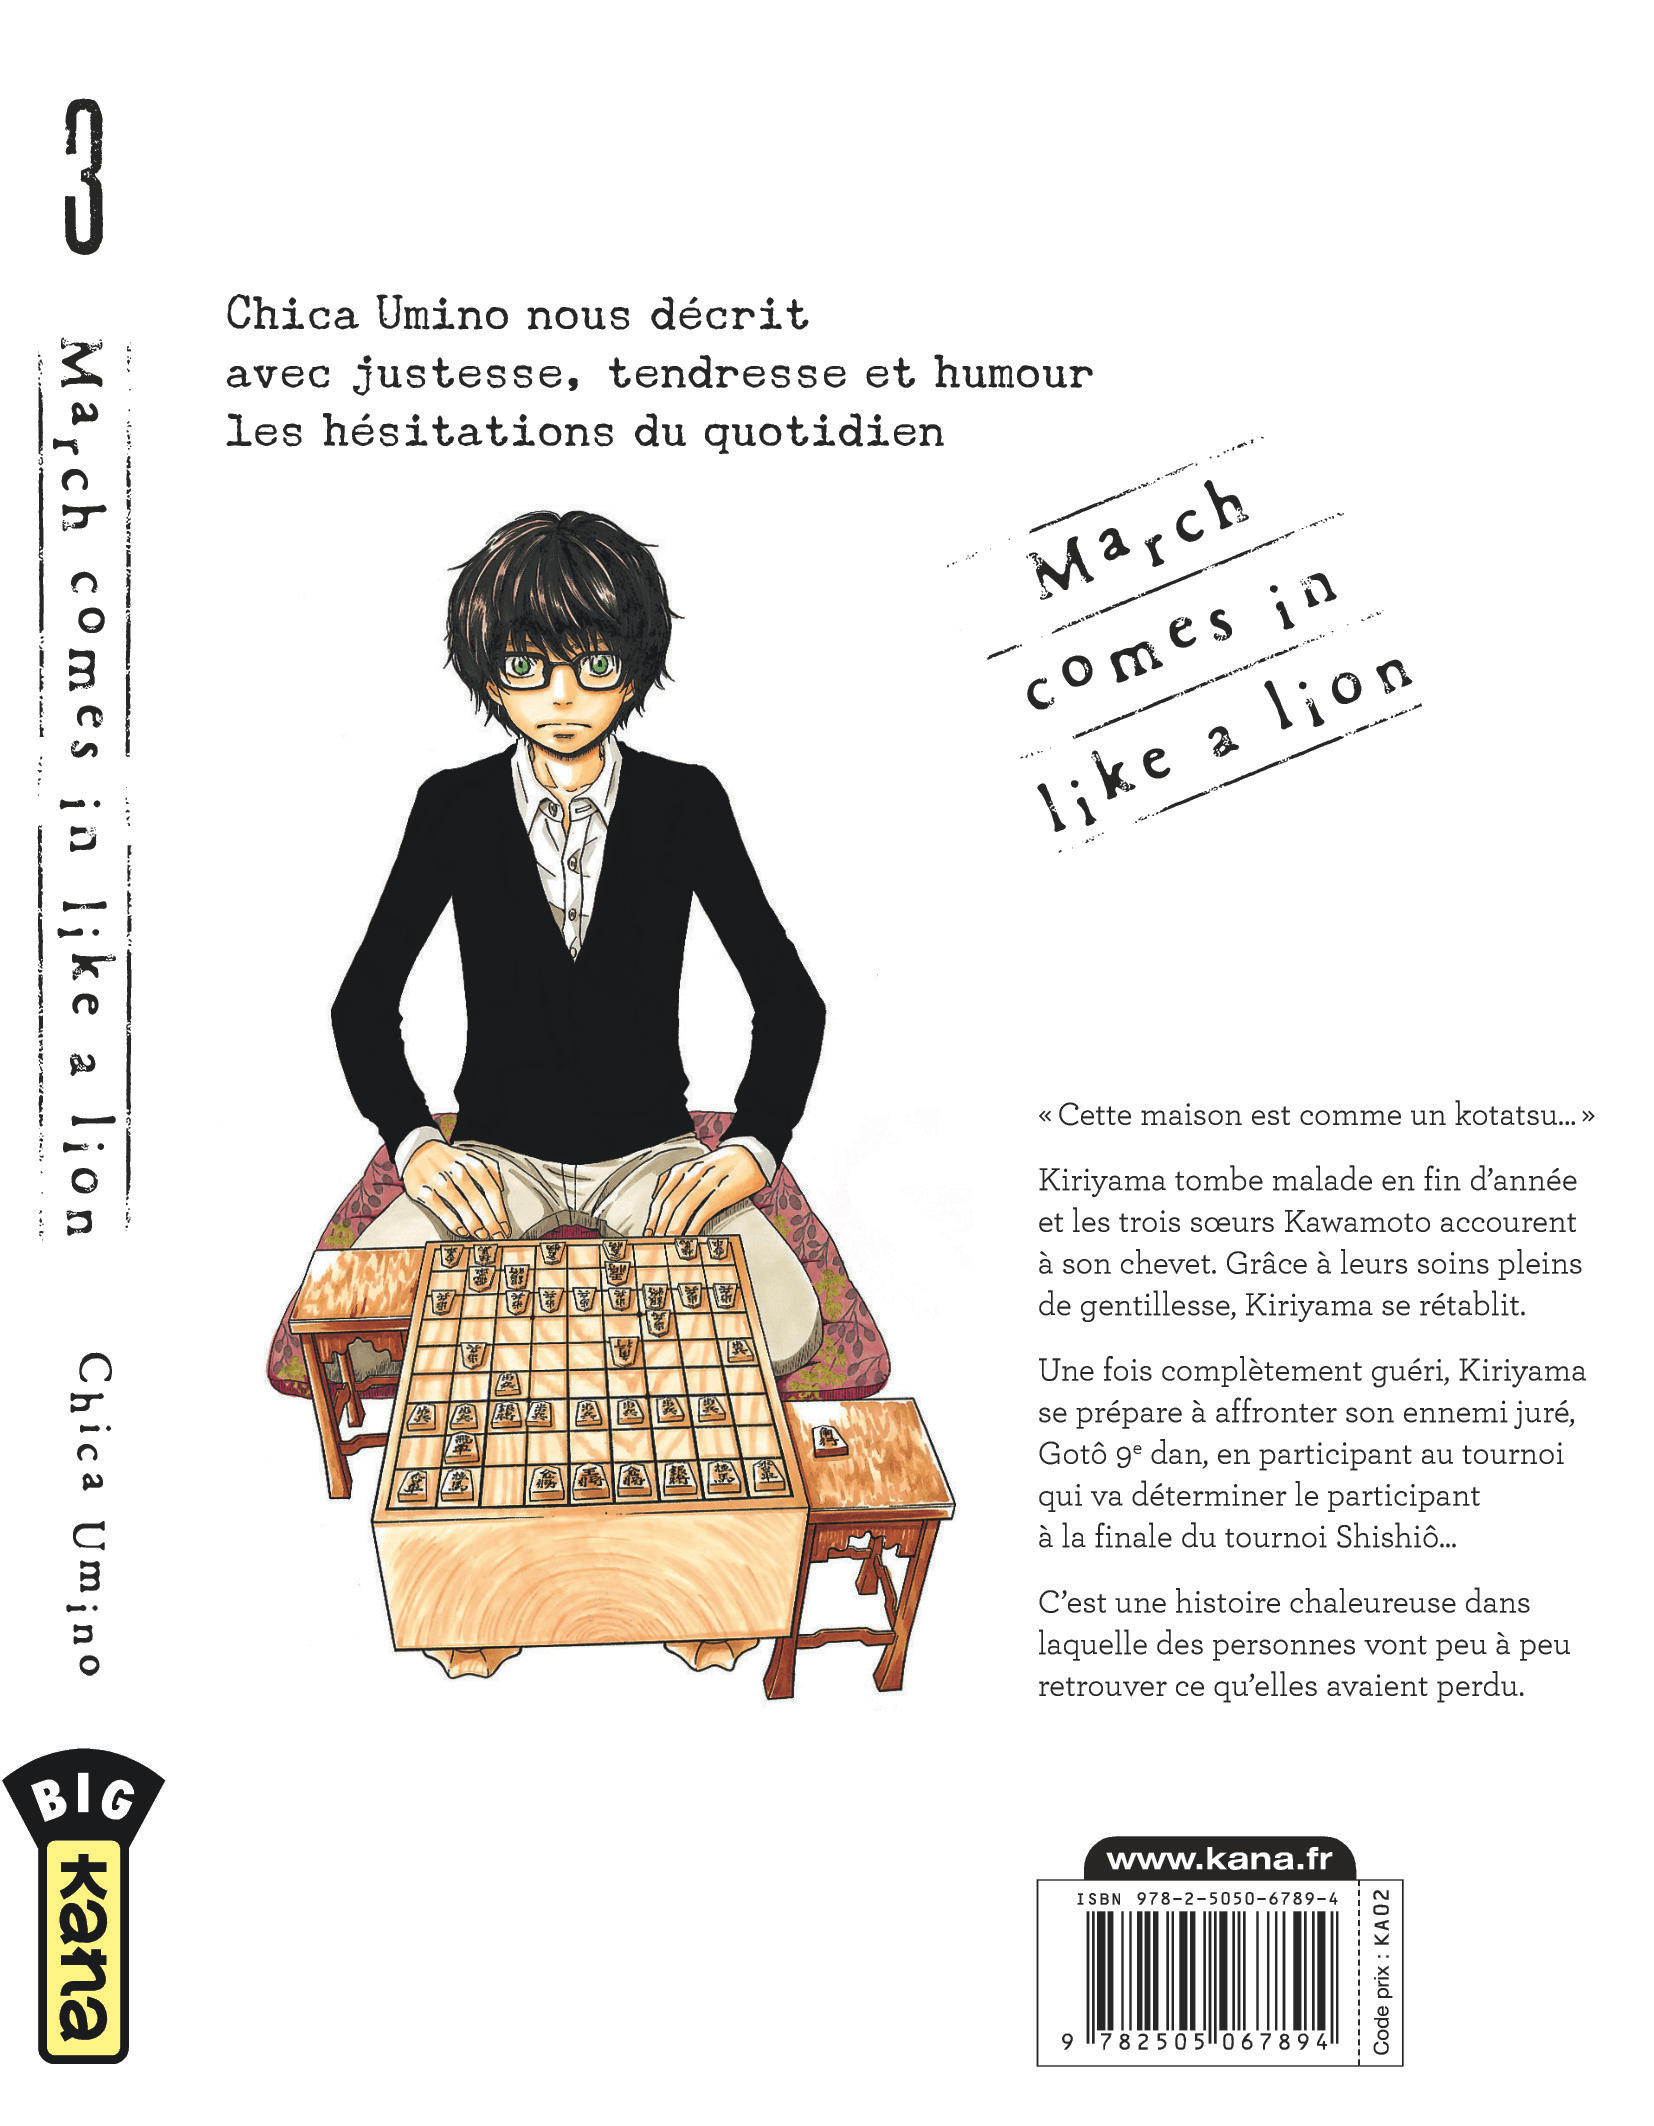 March comes in like a lion – Tome 3 - 4eme